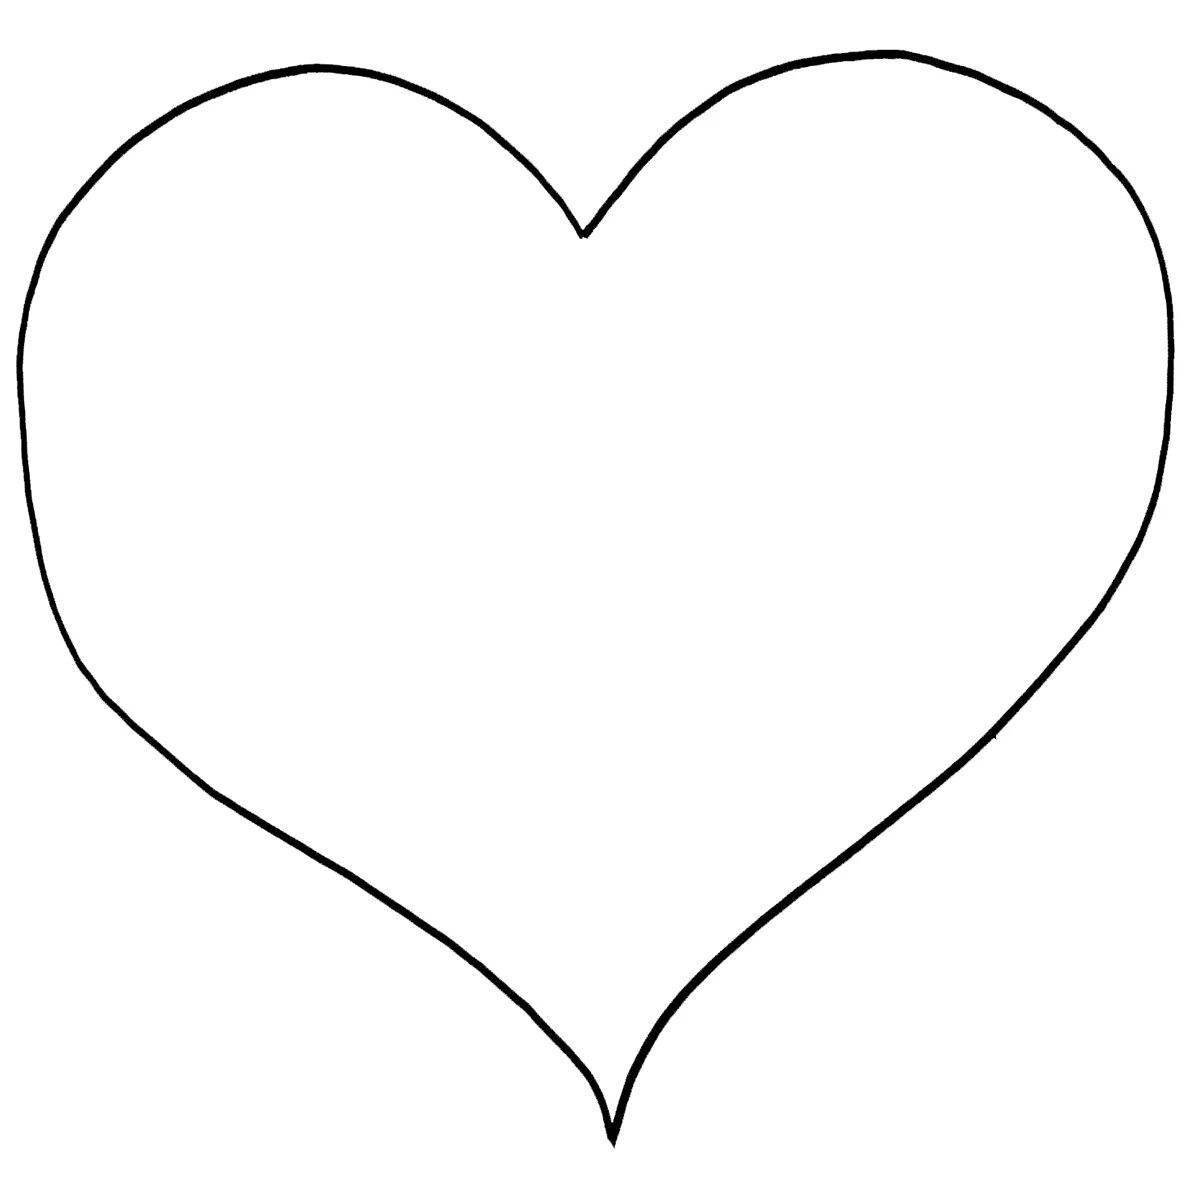 Animated heart coloring page for 3-4 year olds